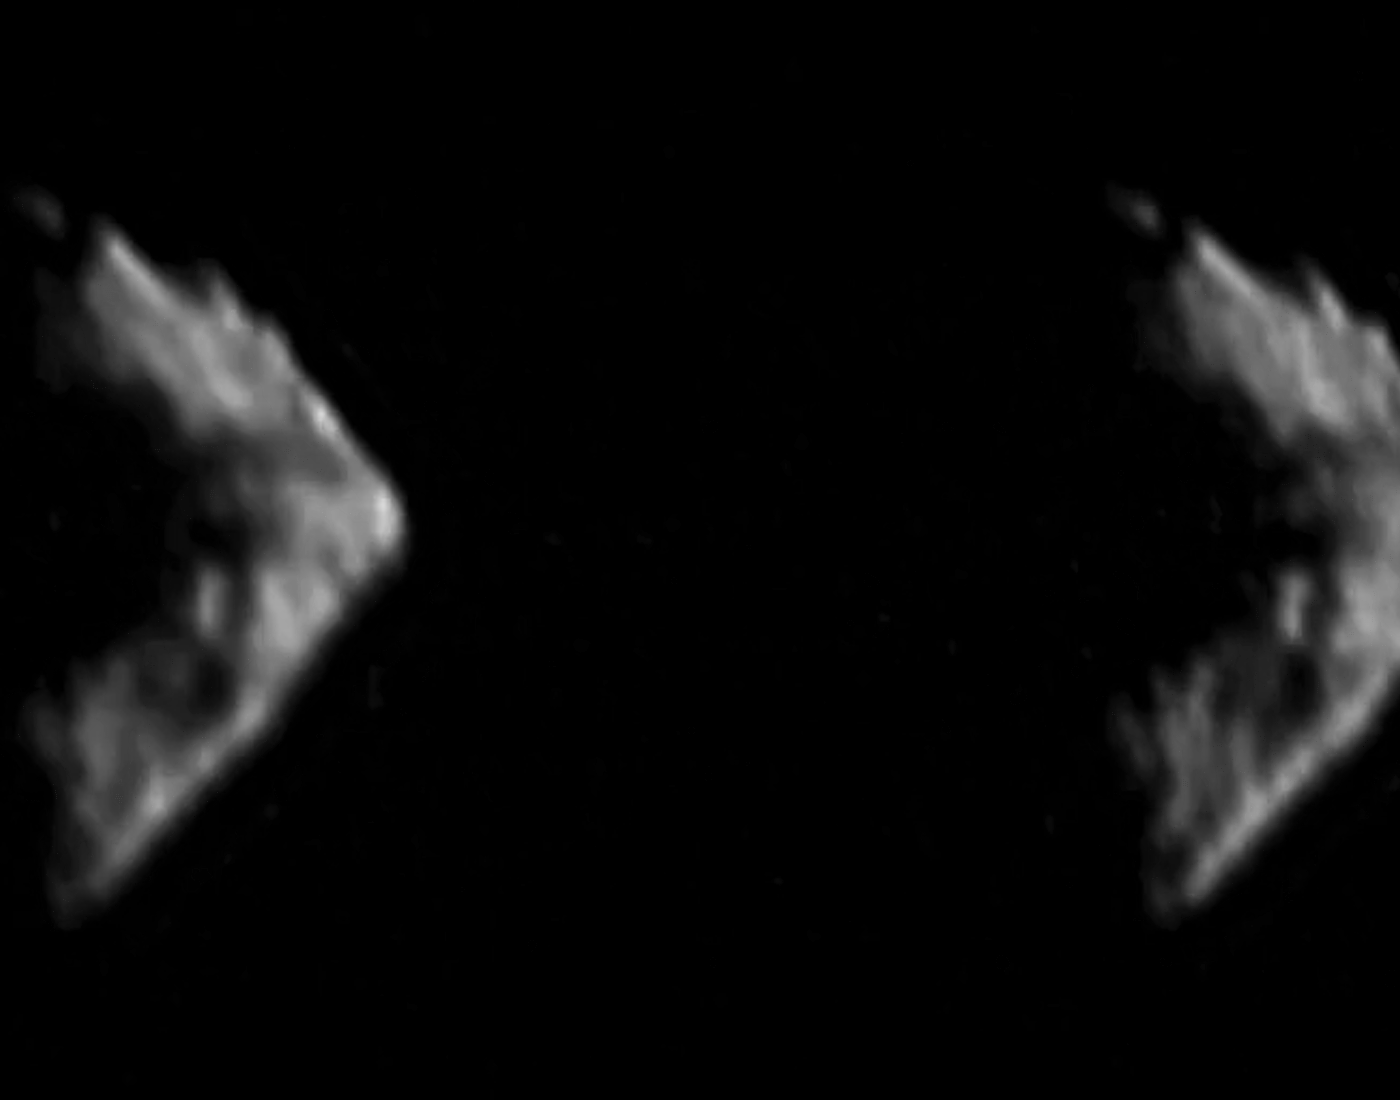 Blurred image of two irregular, angular shapes against a dark background, suggesting a low-resolution, close-up view of celestial objects or debris.